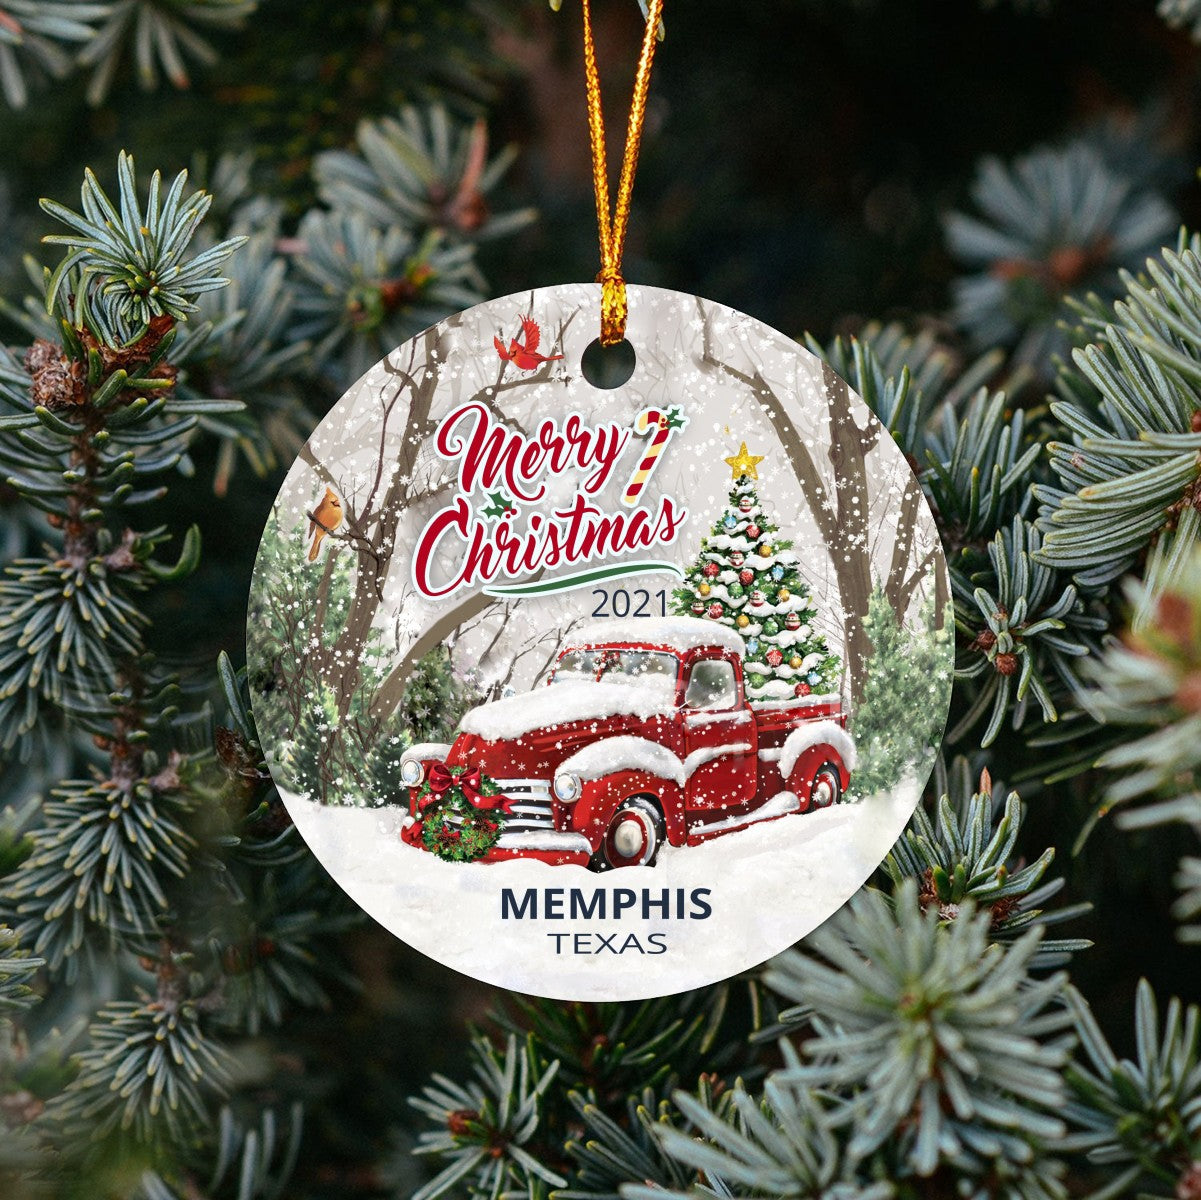 Christmas Tree Ornaments Memphis - Ornament With Name City, State Memphis Texas TX Ornament - Red Truck Xmas Ornaments 3'' Plastic Gift For Family, Friend And Housewarming